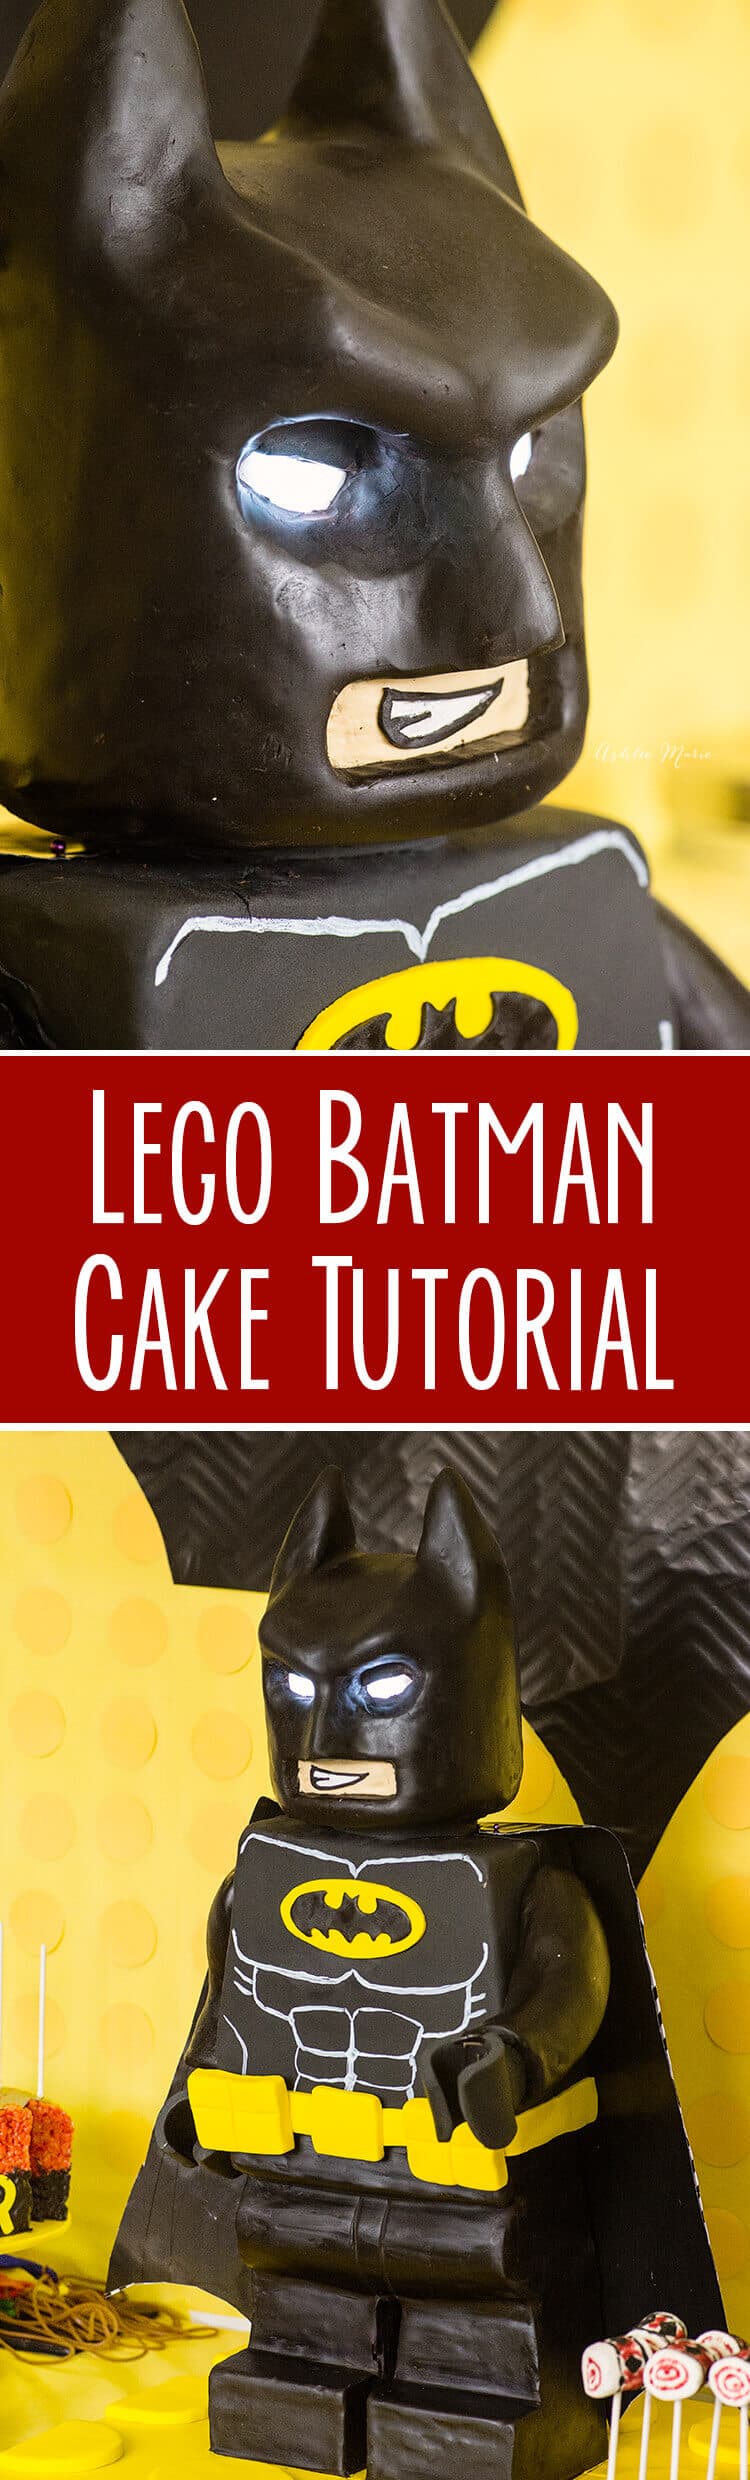 Check out this amazing video tutorial for how to make a standing Lego batman cake - building the internal support system and more - can be used for ANY Lego character cake - full internal